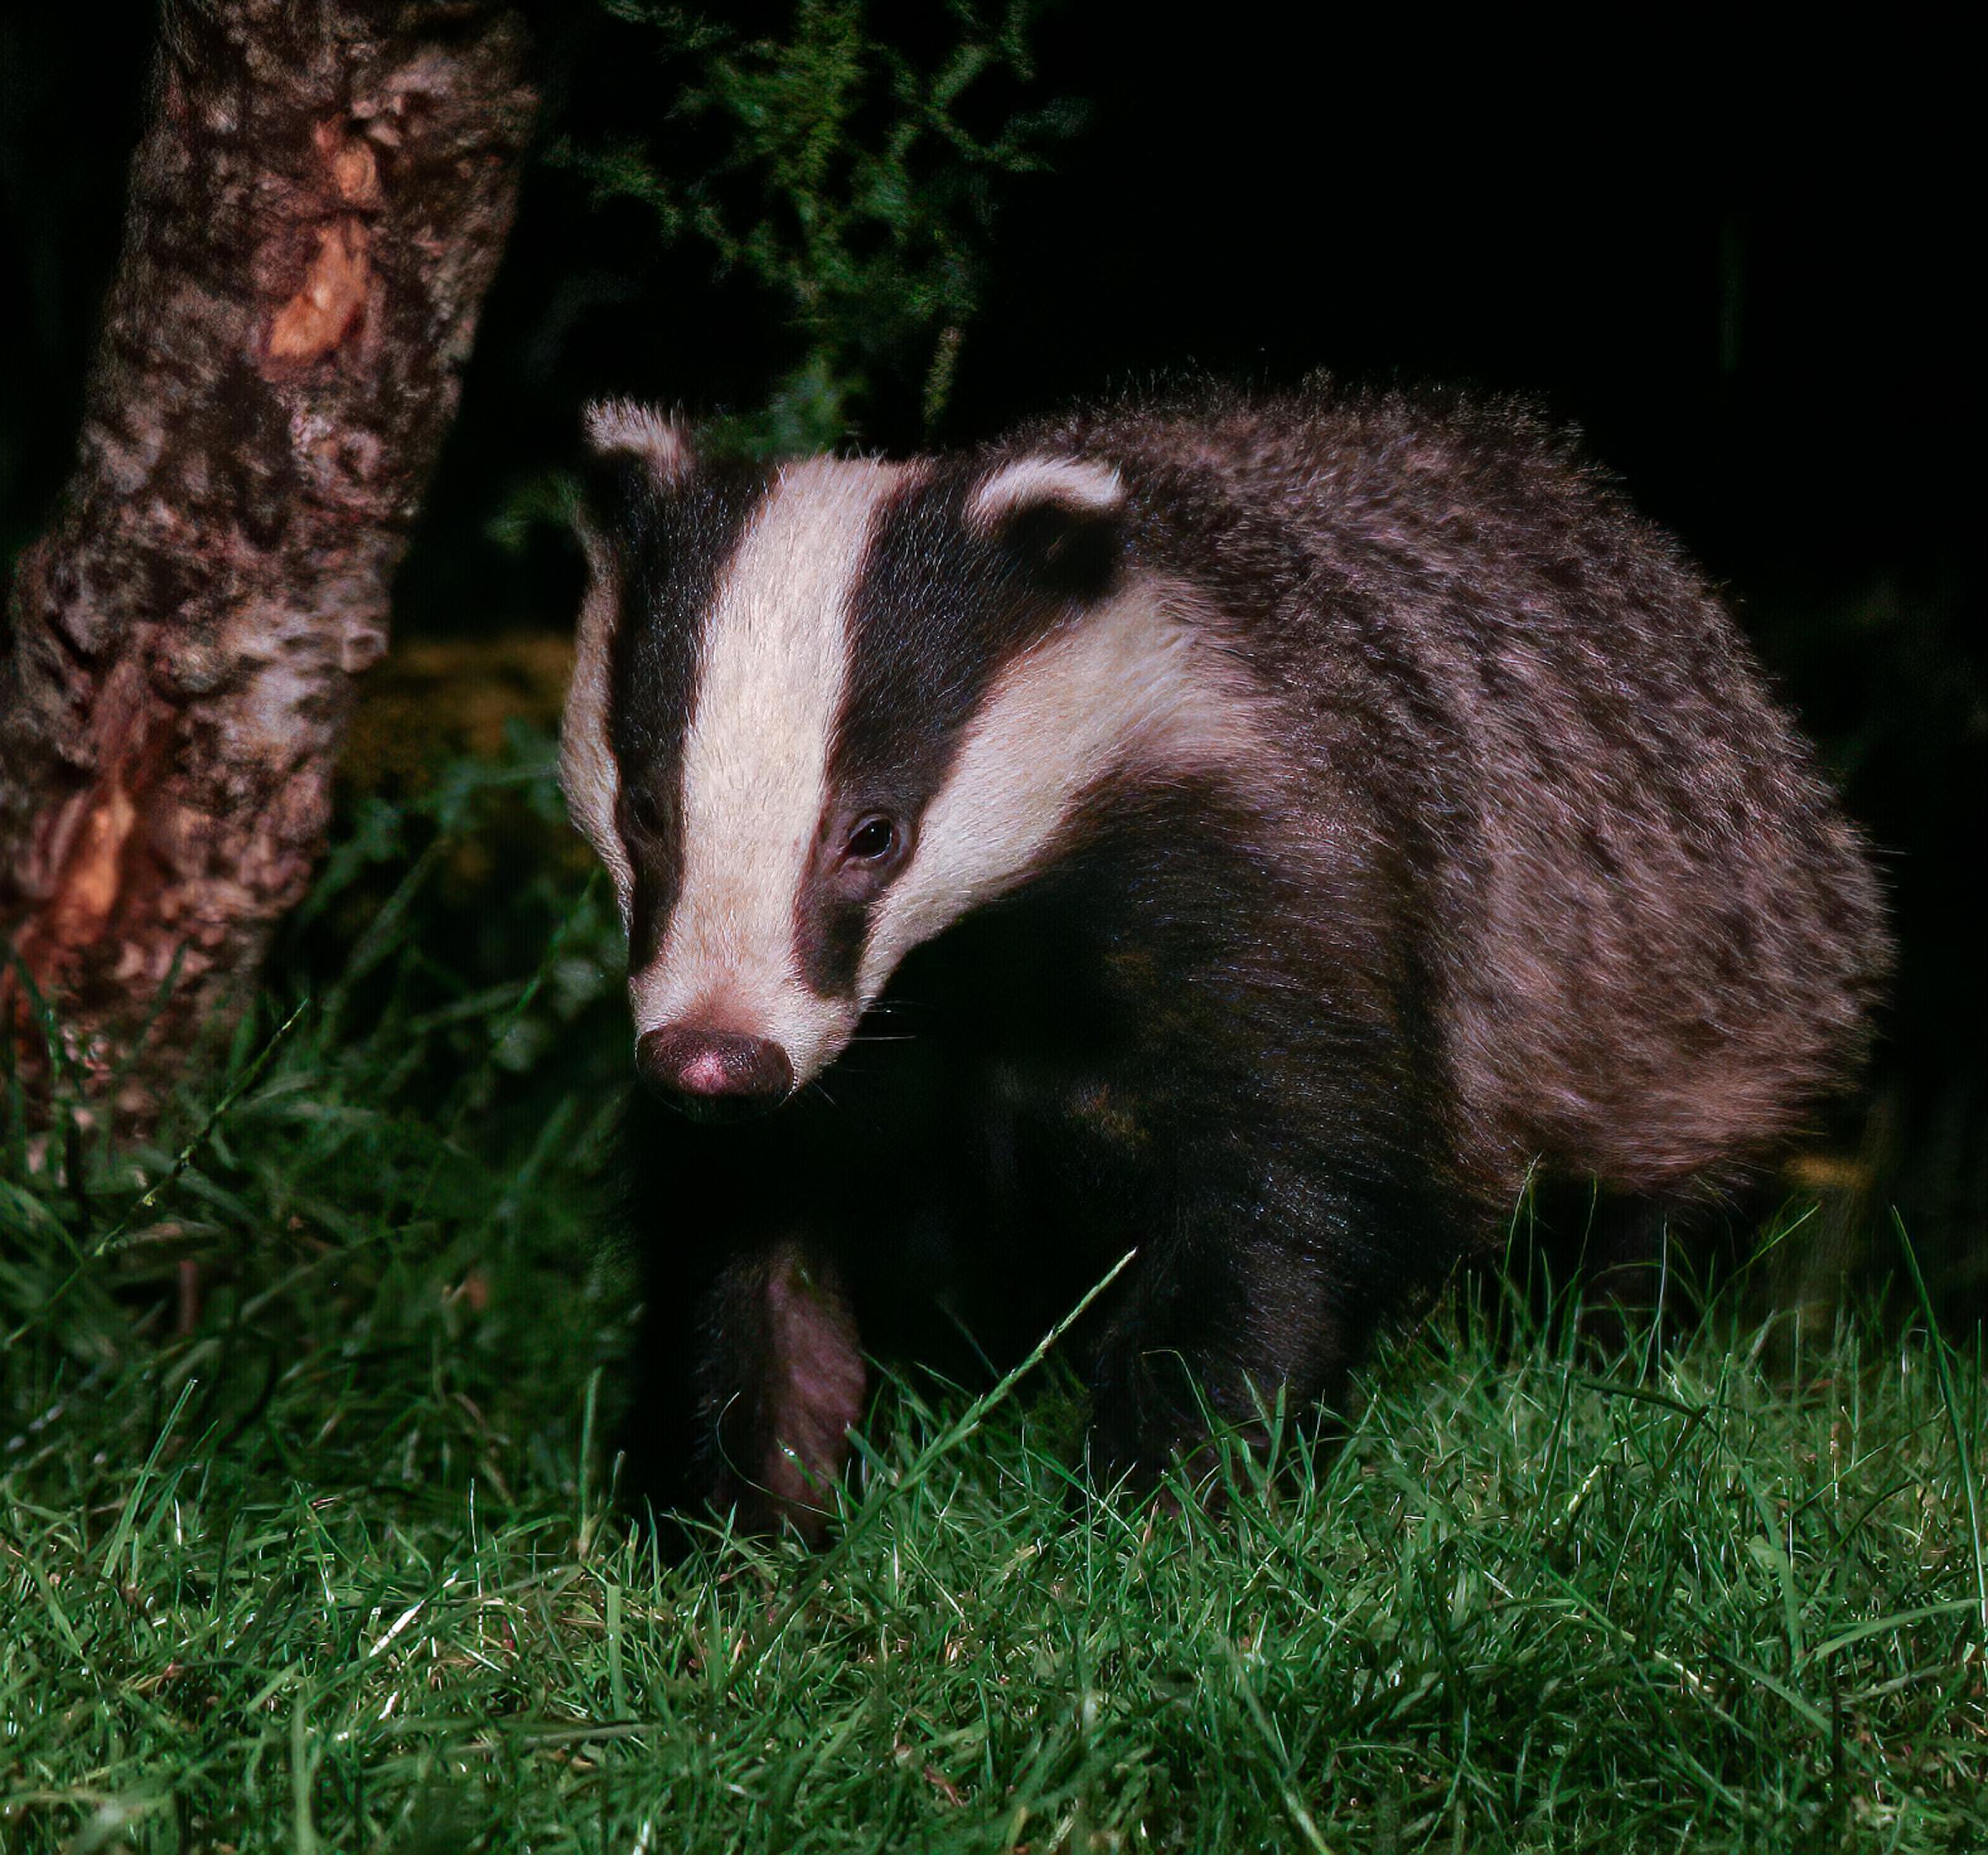 A badger that calls Wirral home